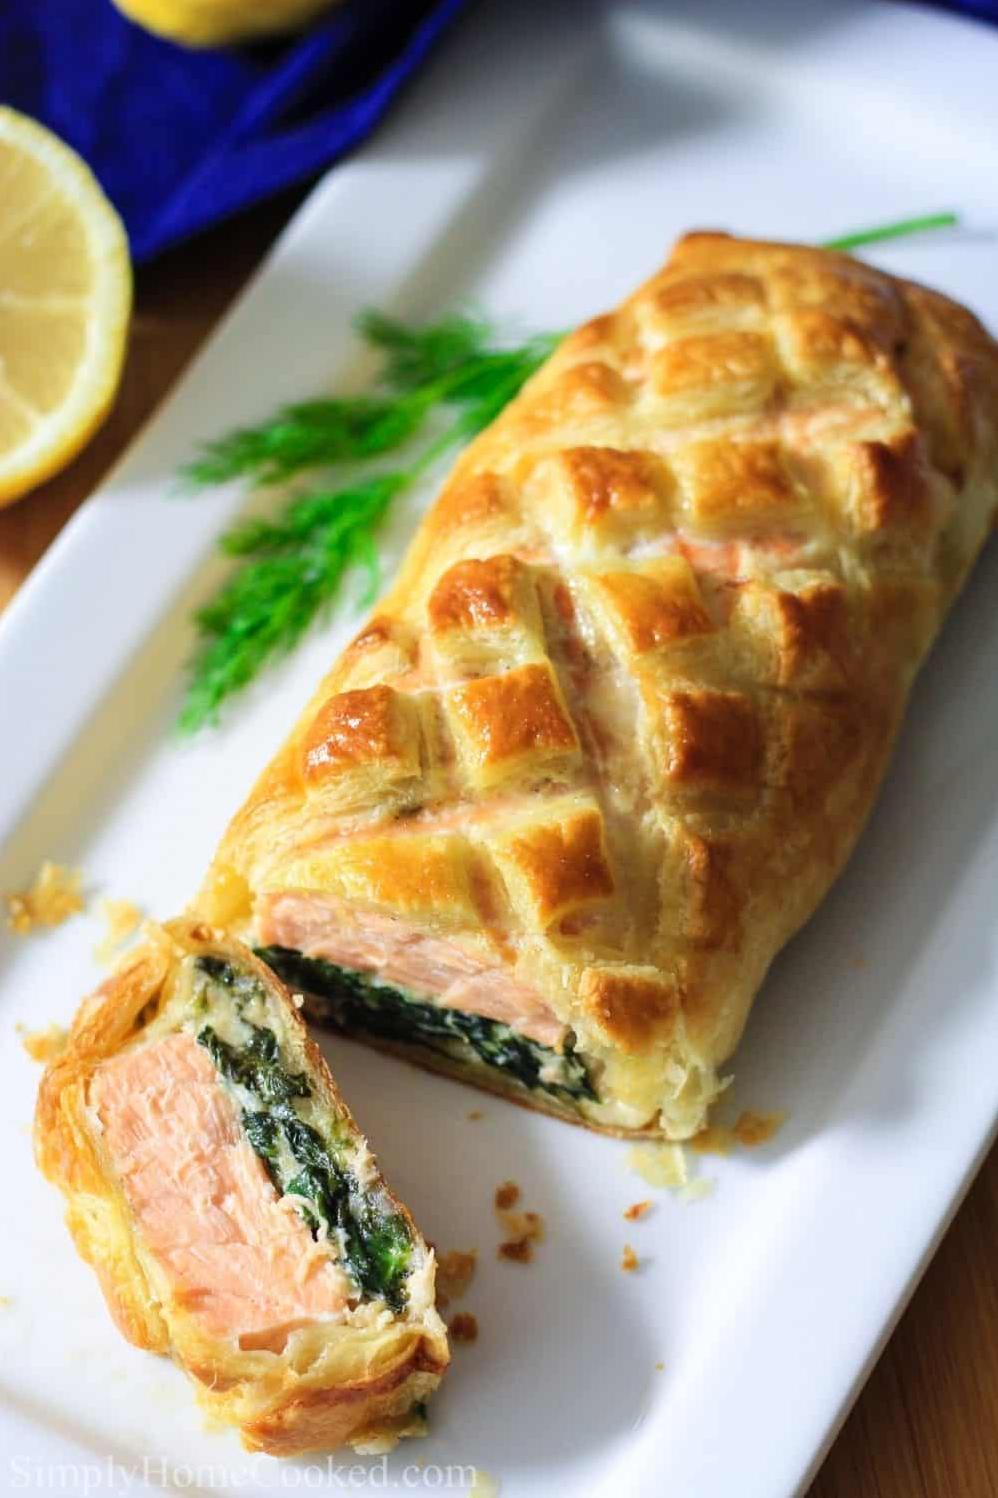  A scrumptious salmon fillet wrapped inside a golden pastry shell is a real showstopper!